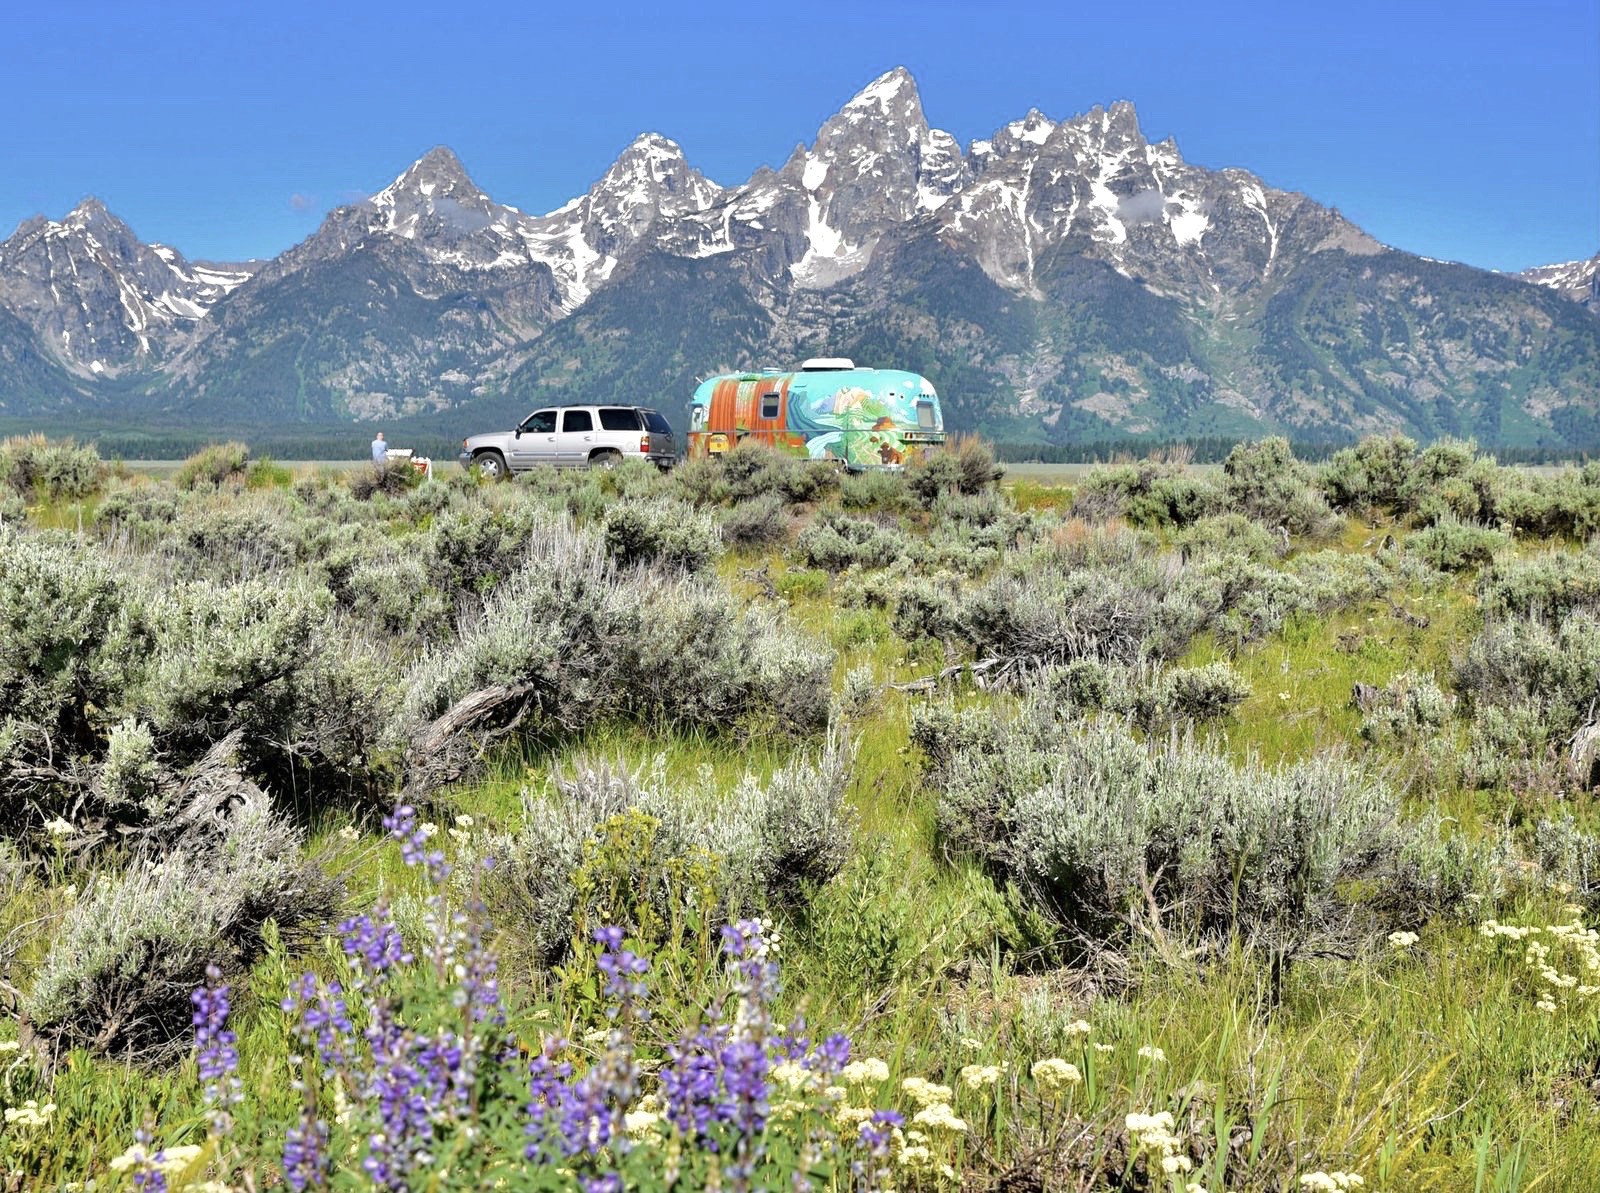 painted Airstream at one of the many overlooks at Grand Teton National Park